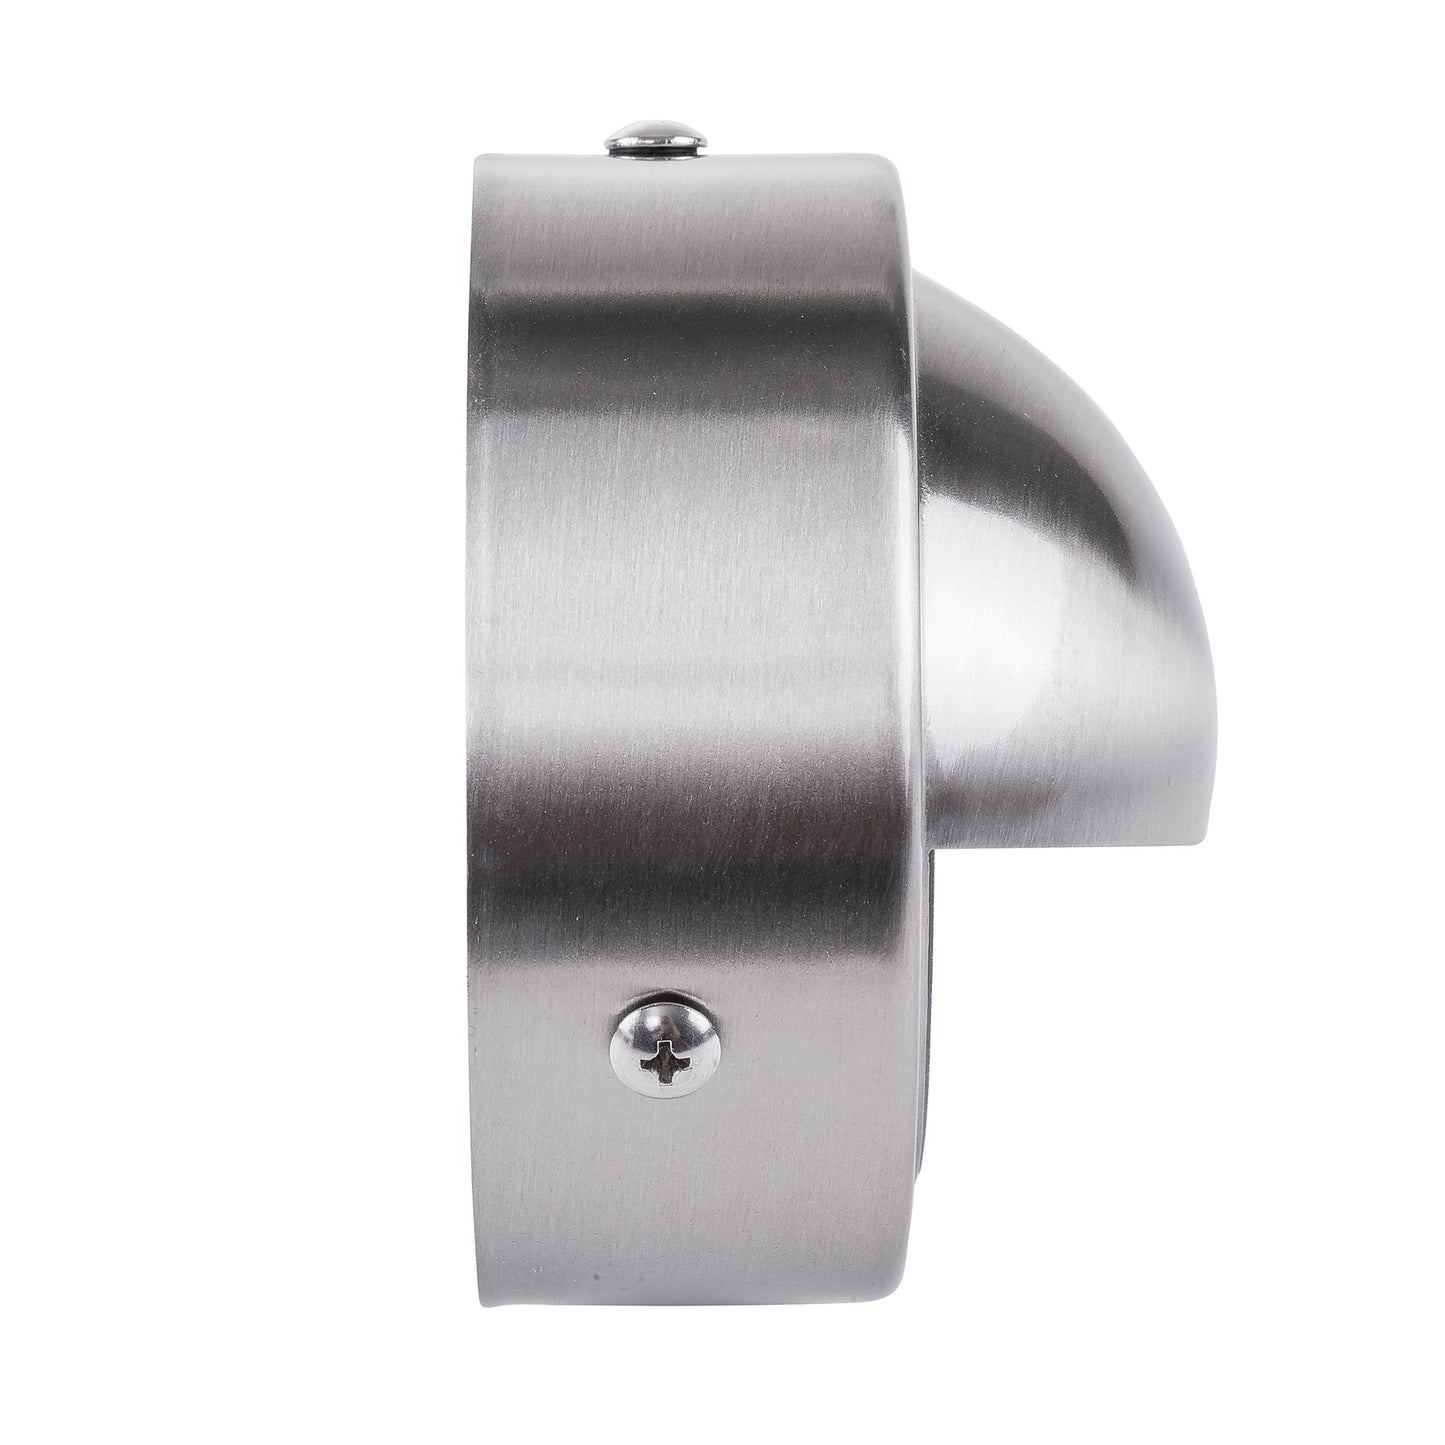 Surface Mounted Step Light With Large Eyelid 316 Stainless Steel 